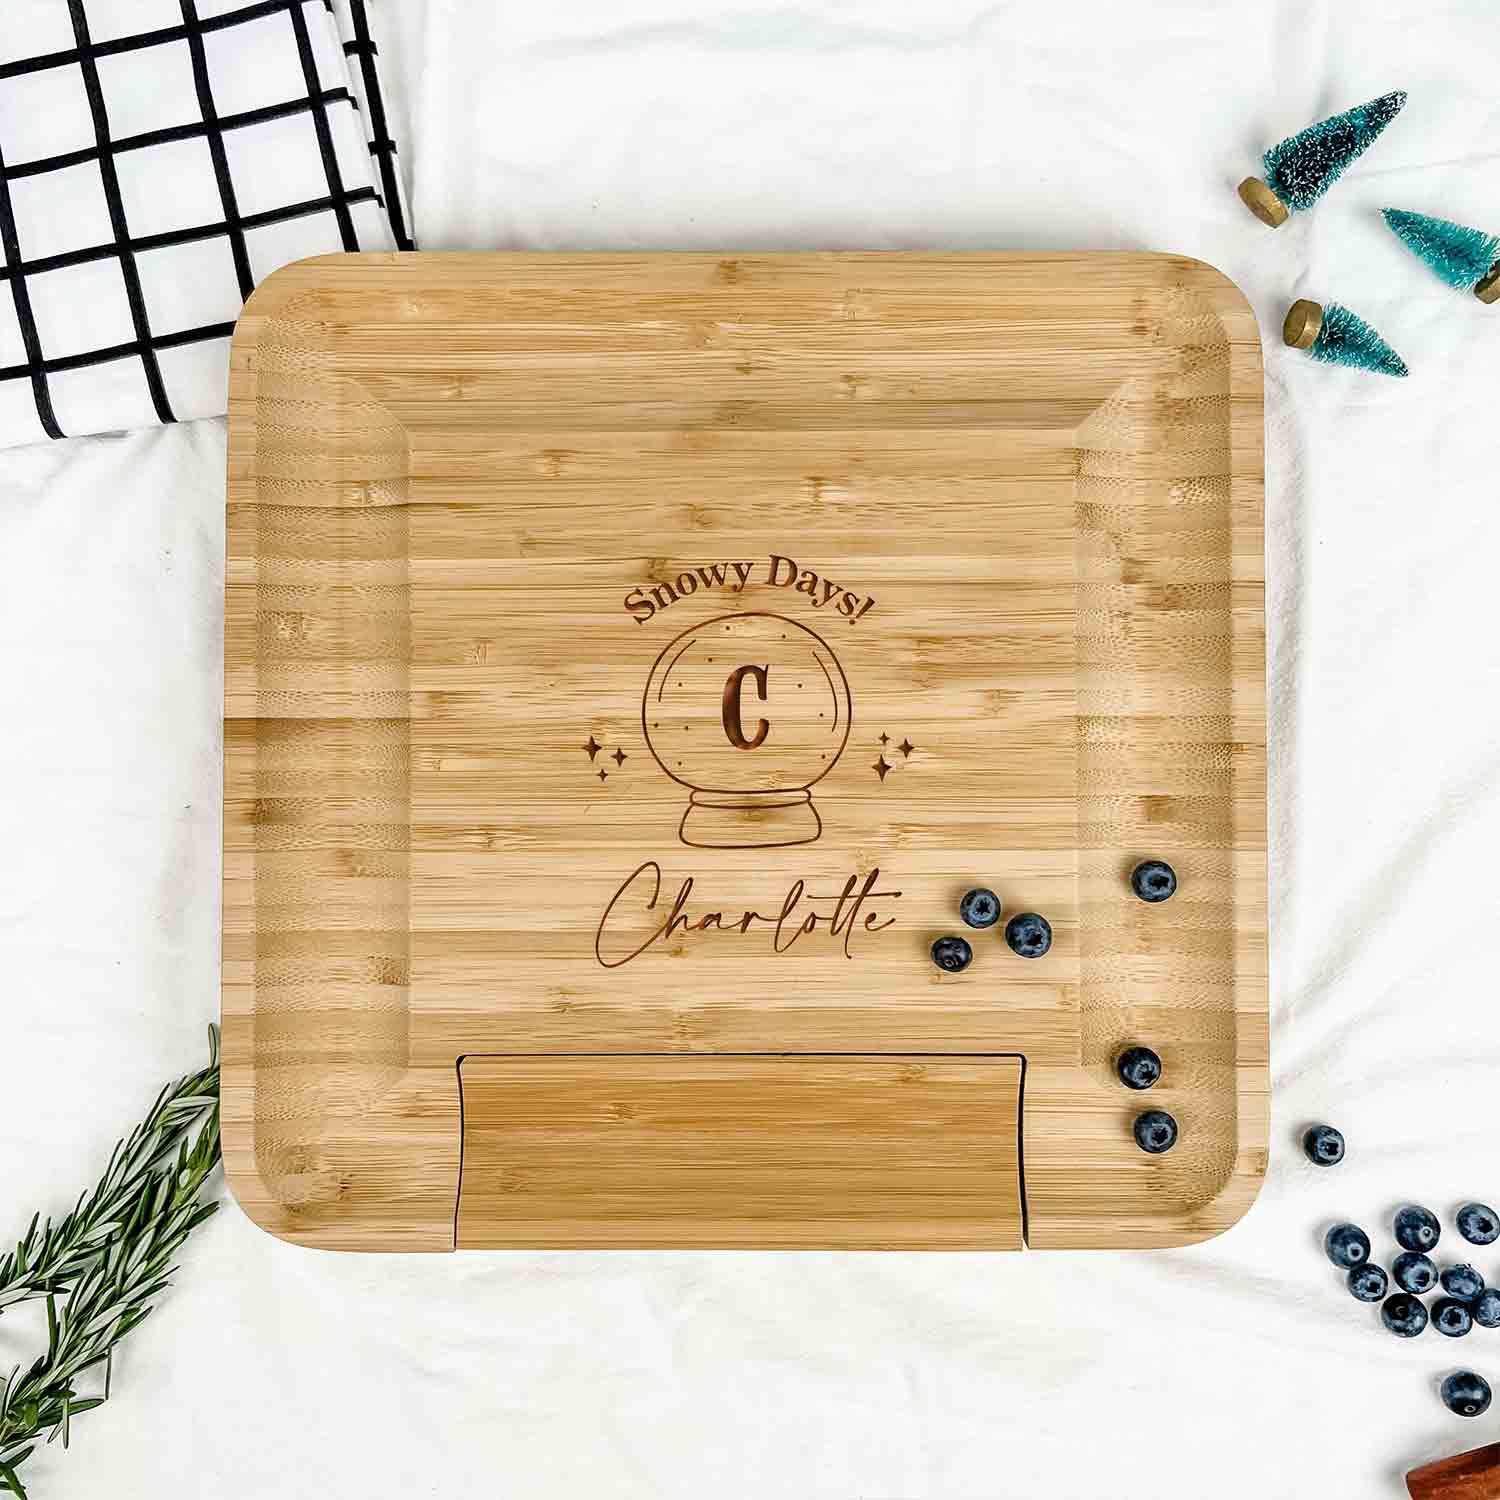 Engraved Wooden Square Cheese Board - Snow Globe Monogram Design